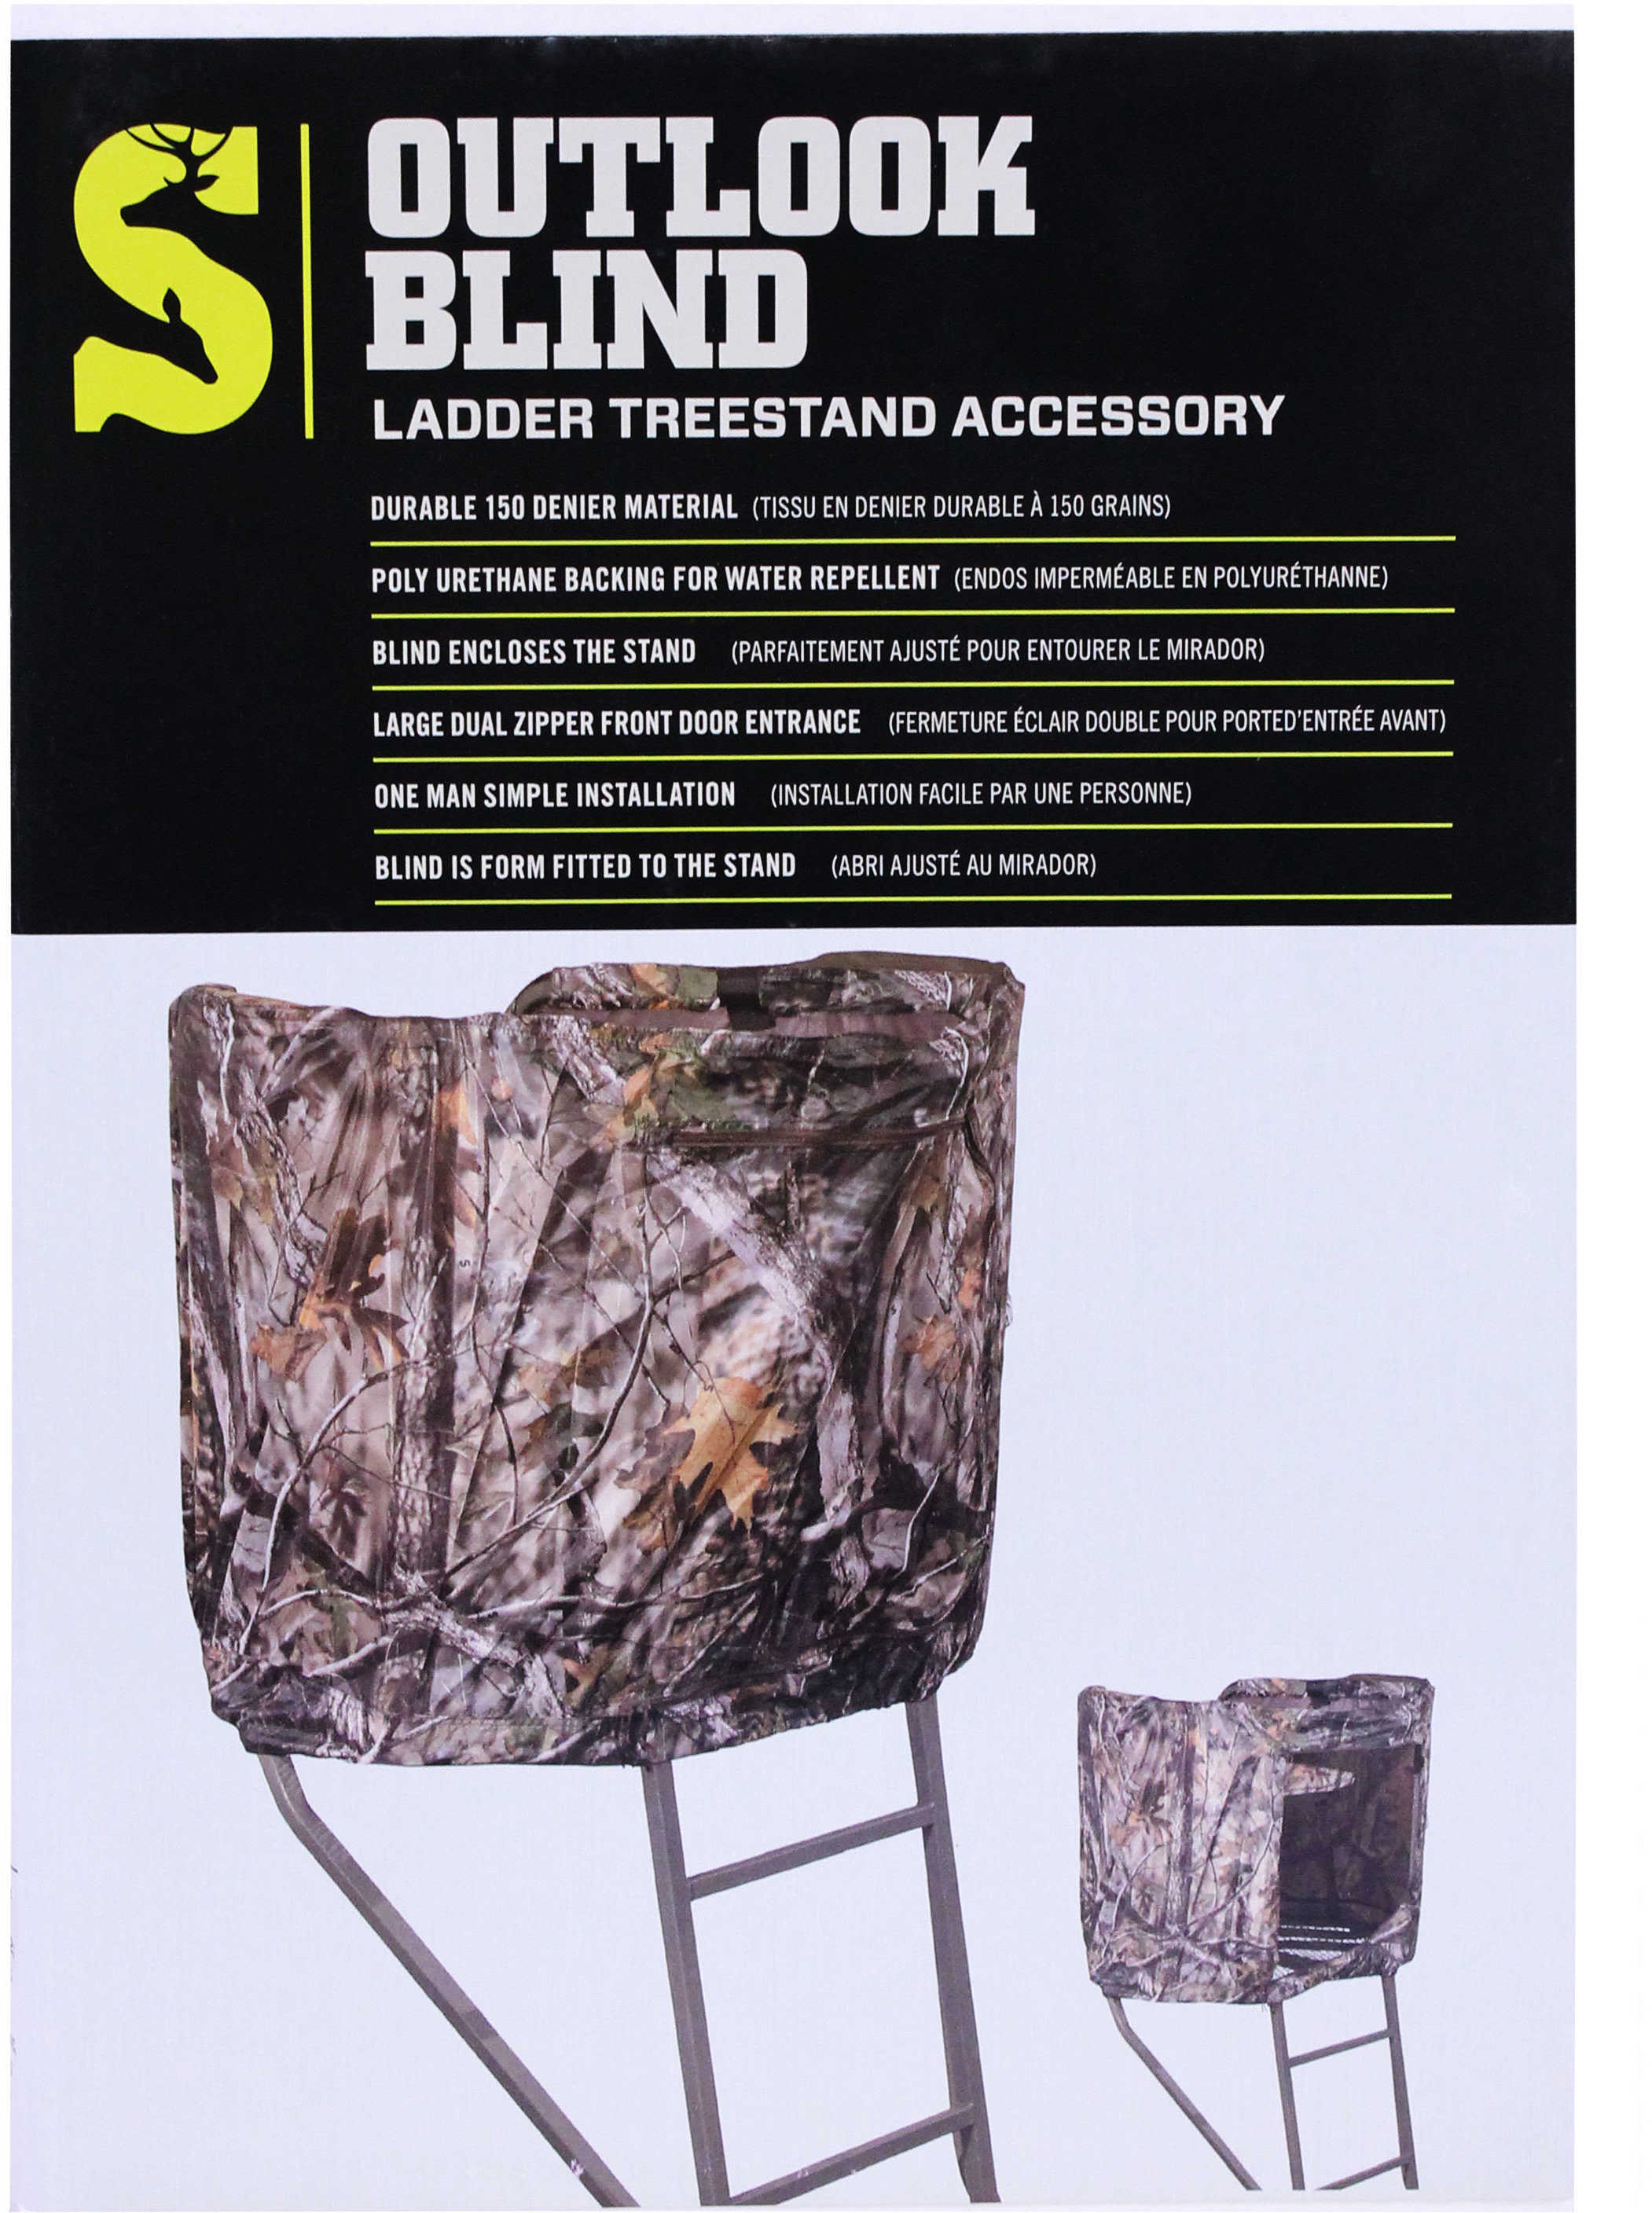 Summit Treestands Hunting Blind Outlook Md: SU85264